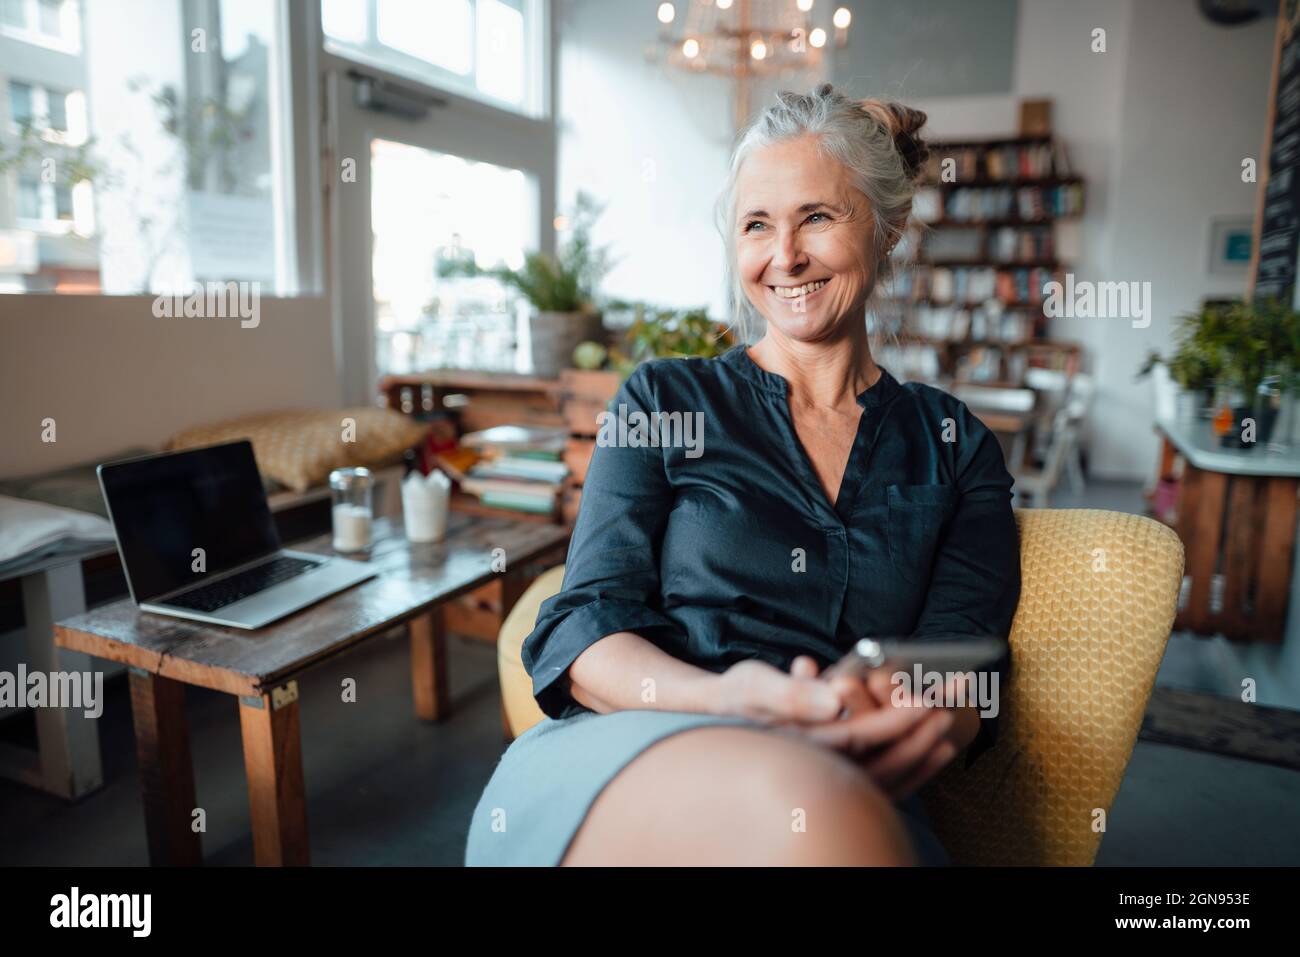 Businesswoman sitting with legs crossed at knee on chair in cafe Stock Photo